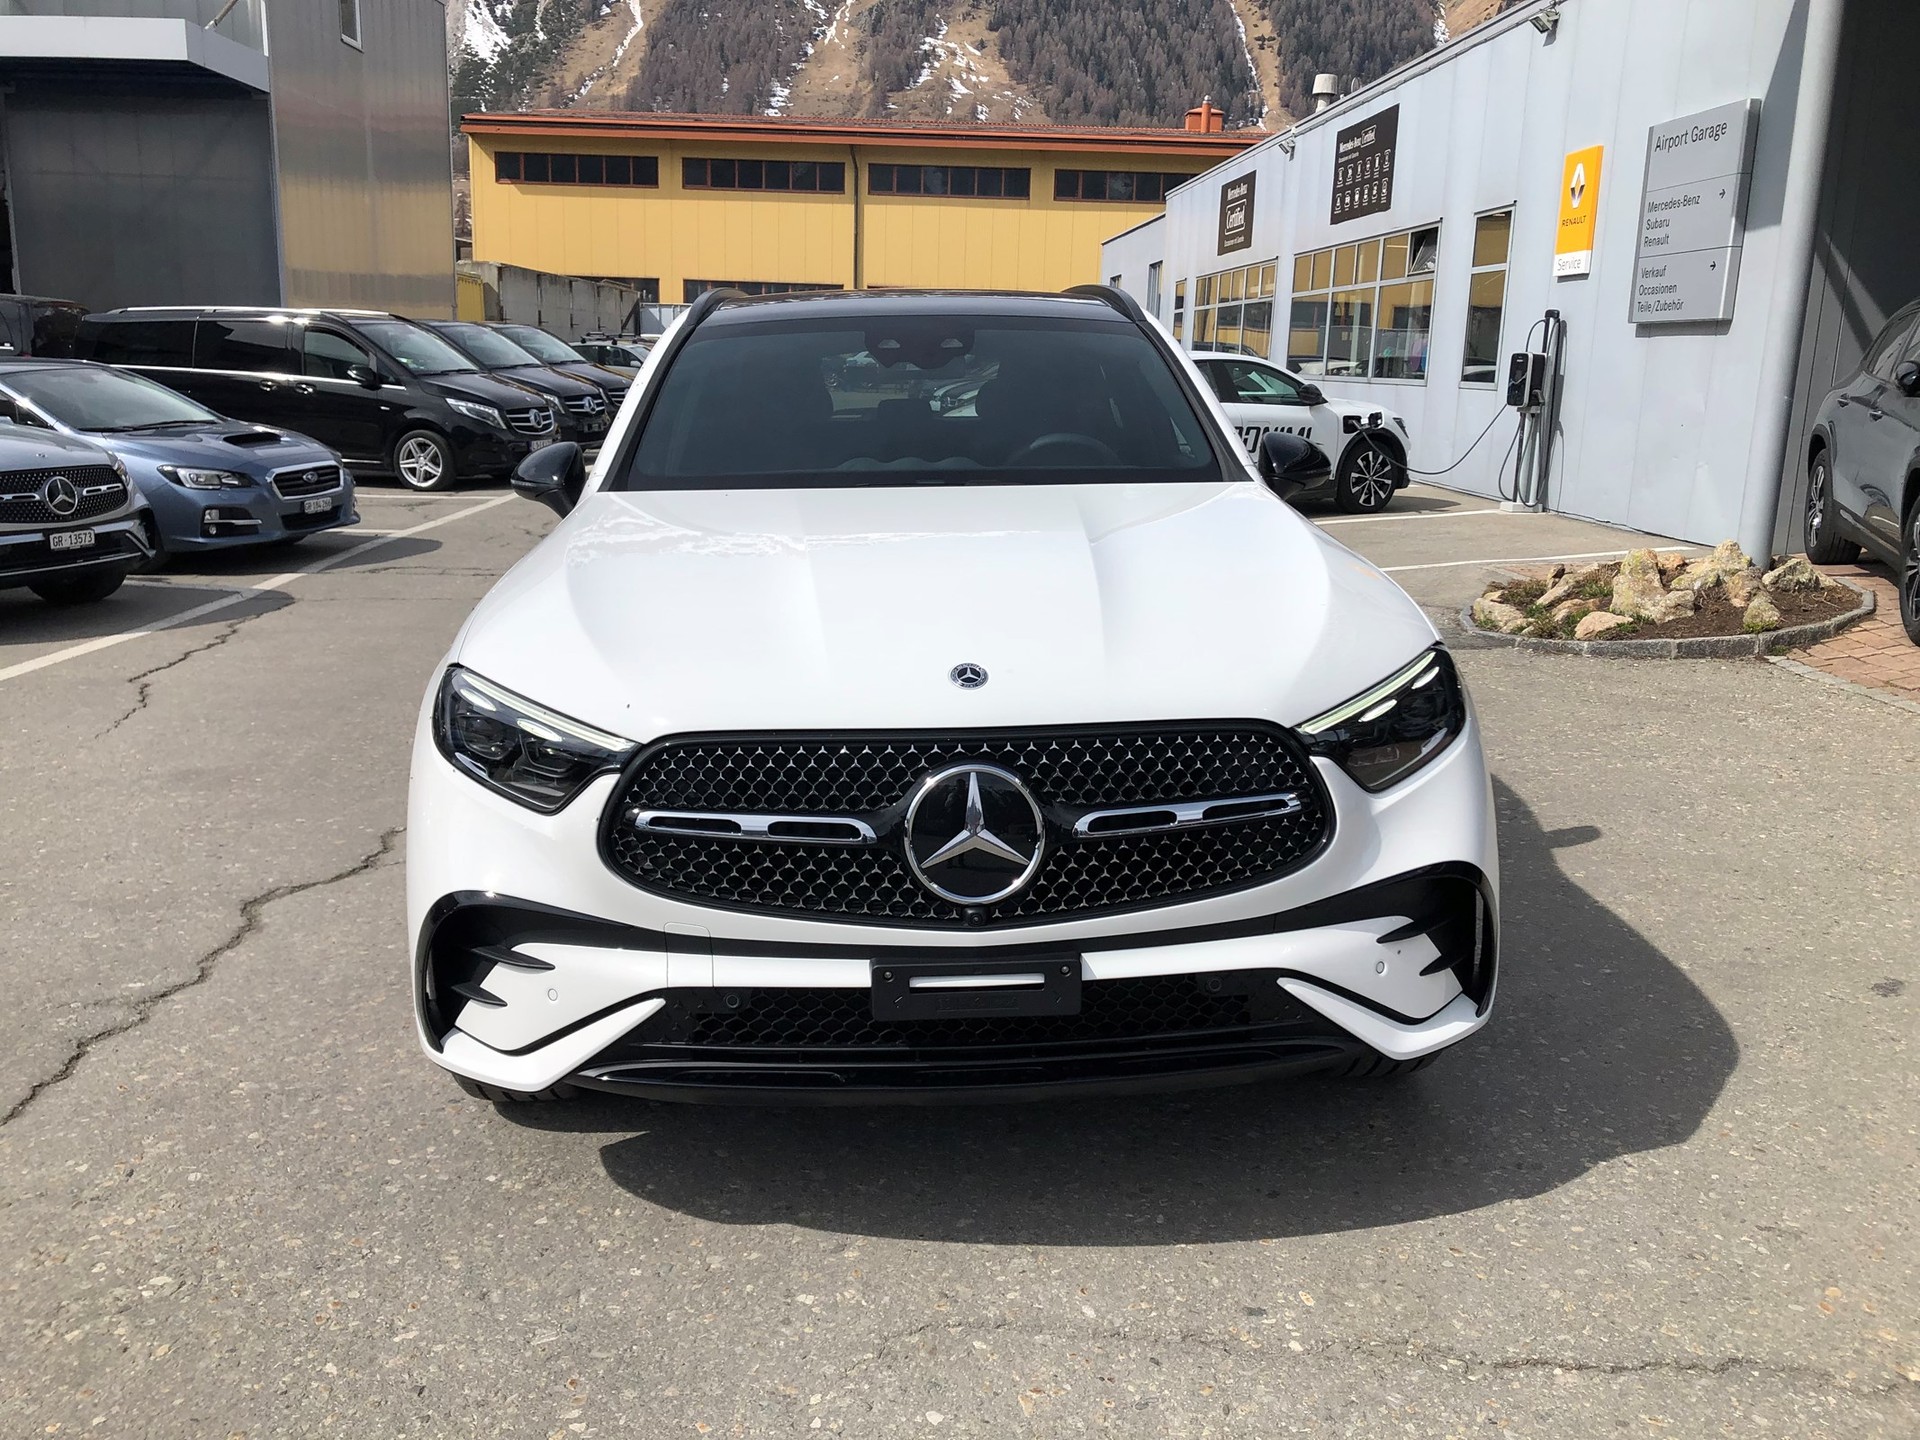 https://listing-images.autoscout24.ch/391/10378391/6.jpg?w=1920&q=90